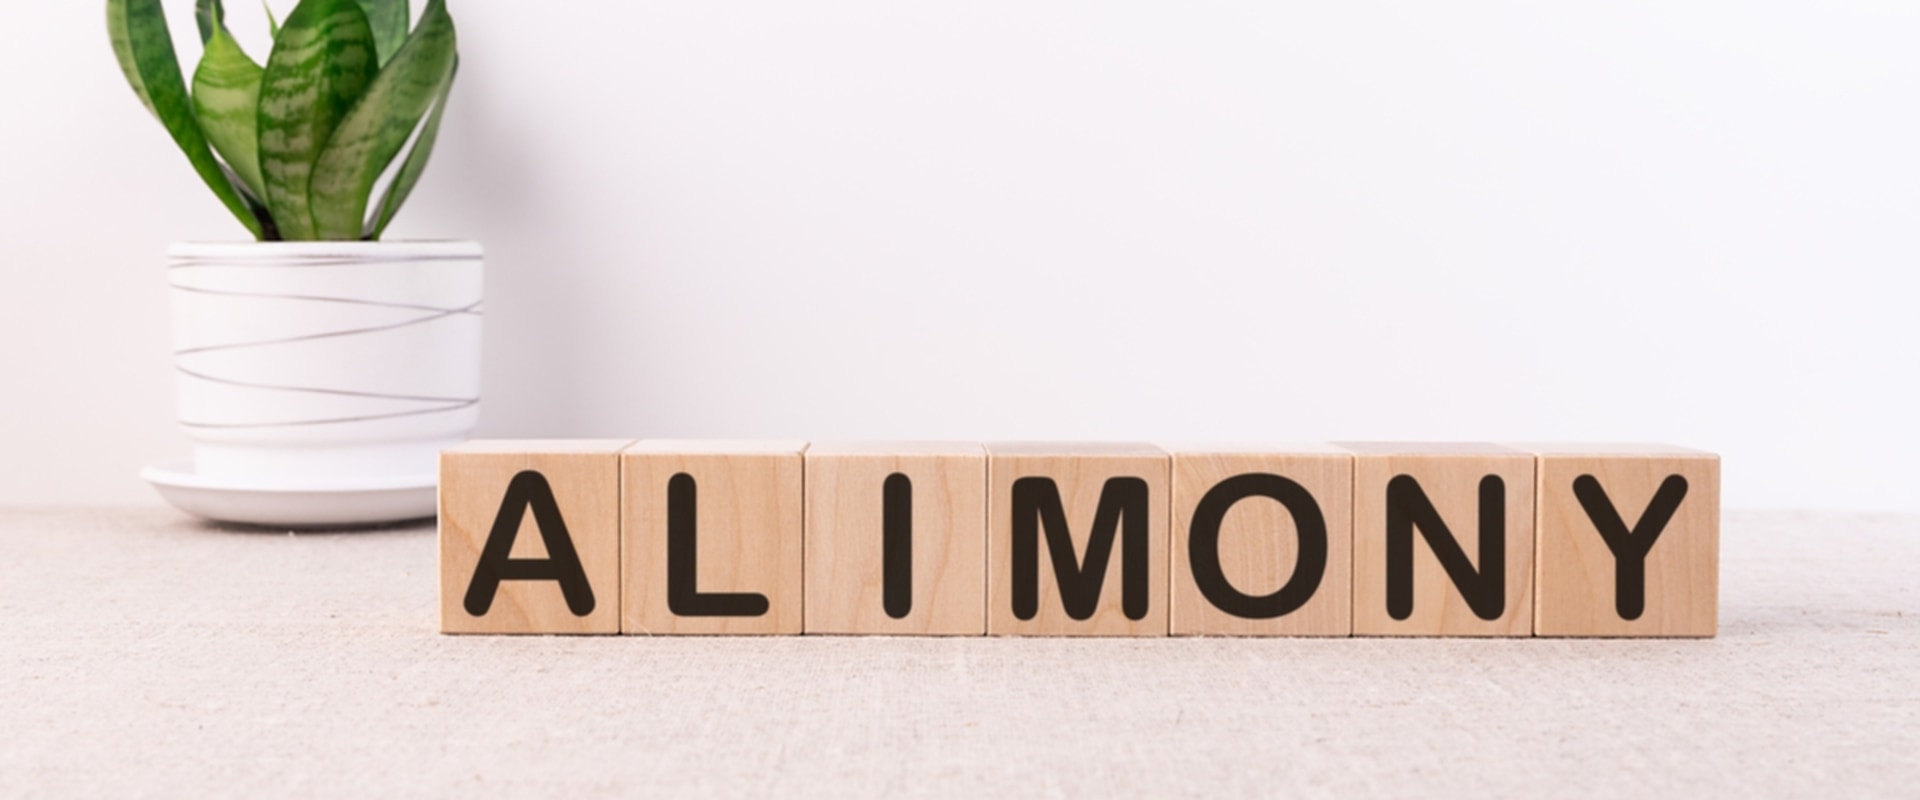 Factors Considered in Modifying Alimony Awards